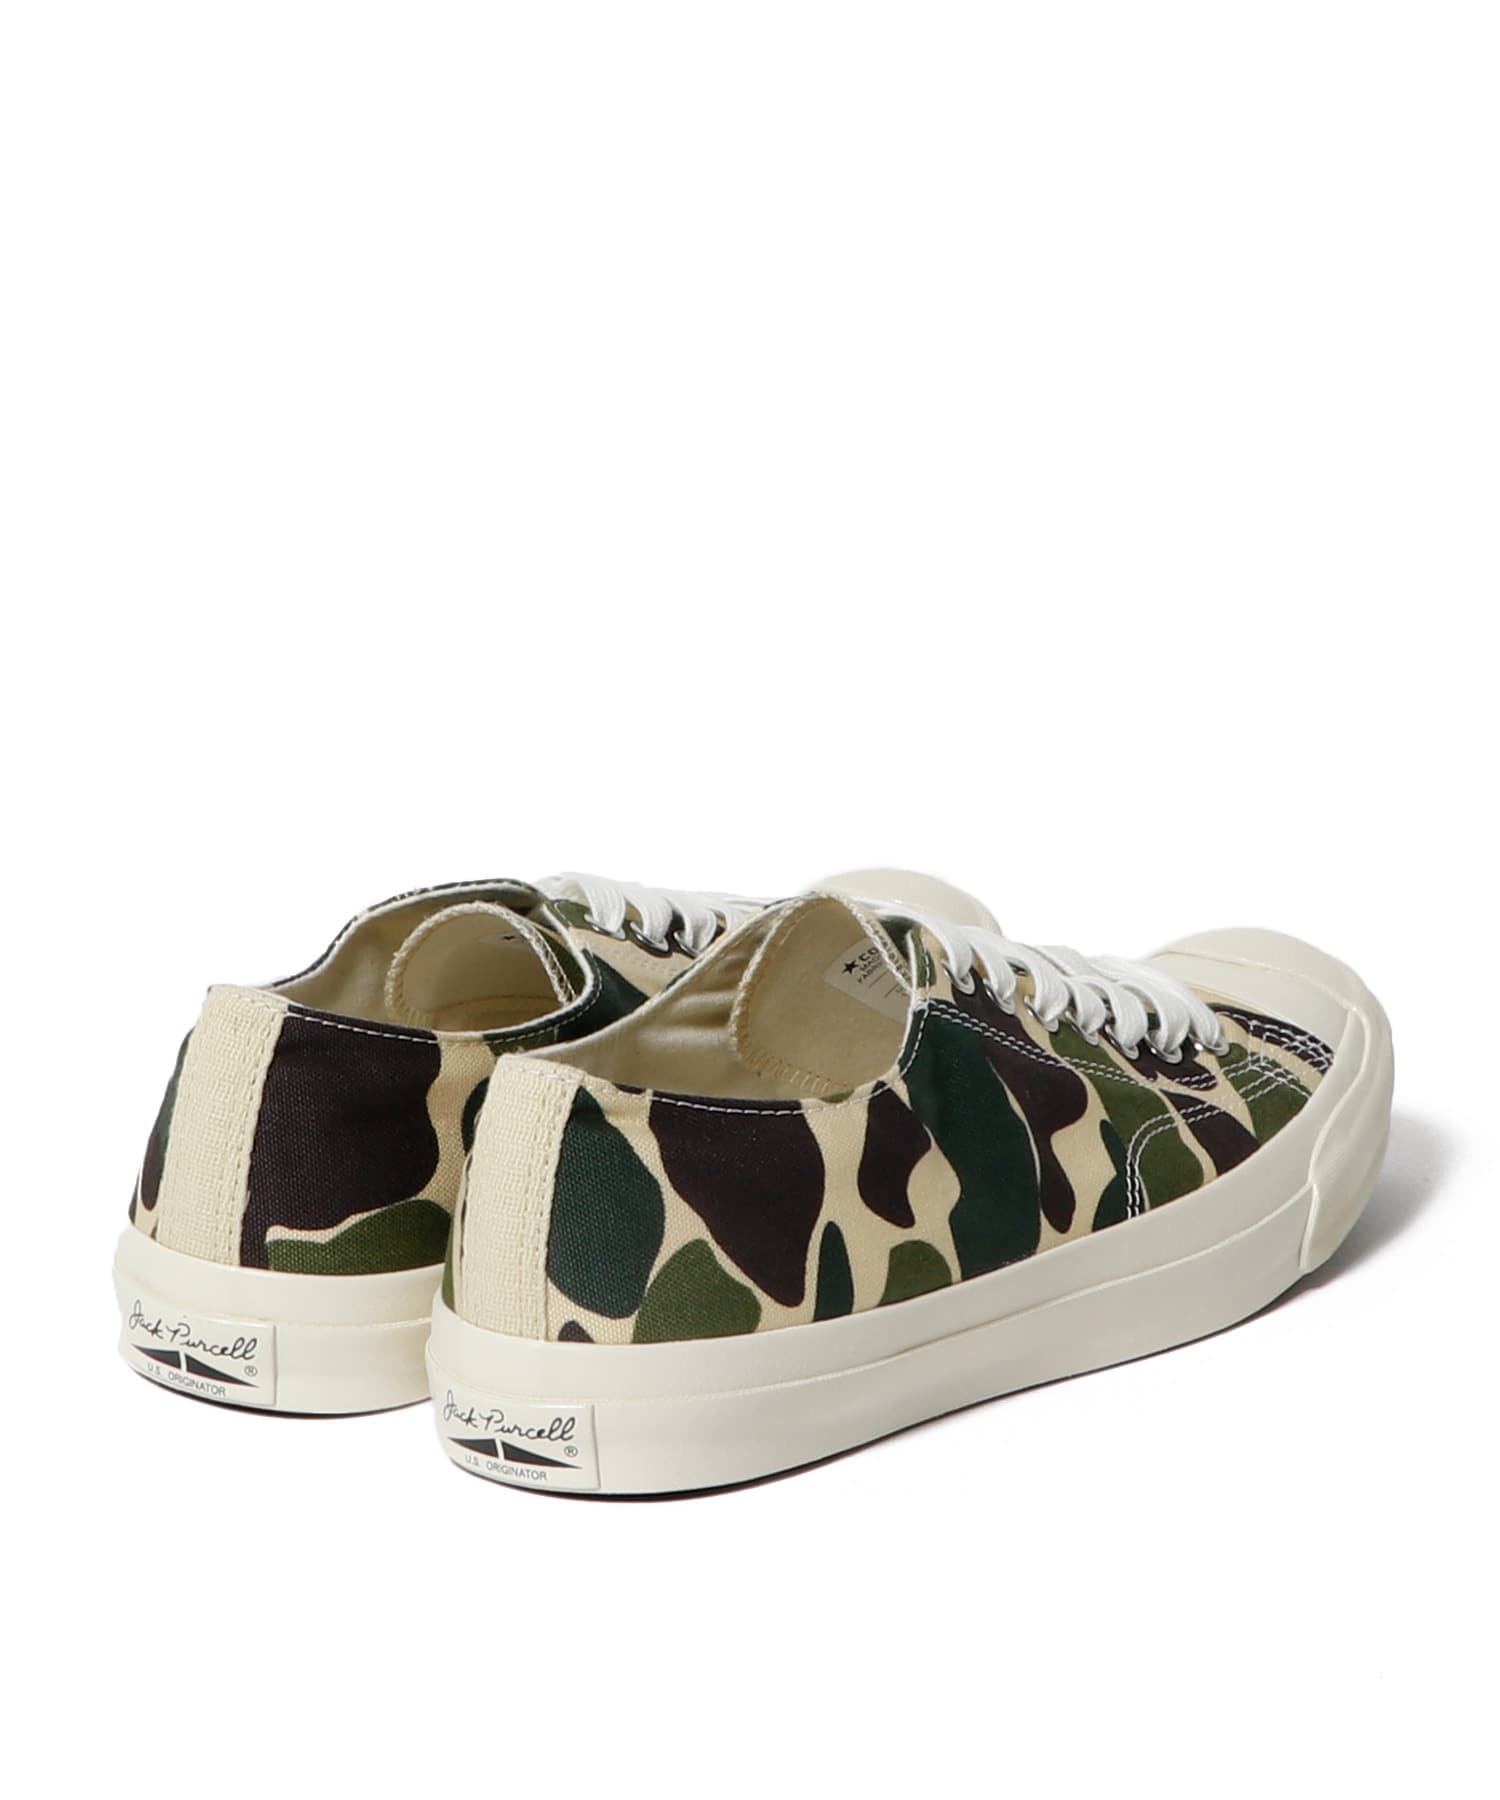 JACK PURCELL US 83CAMO 詳細画像 オリーブ 6